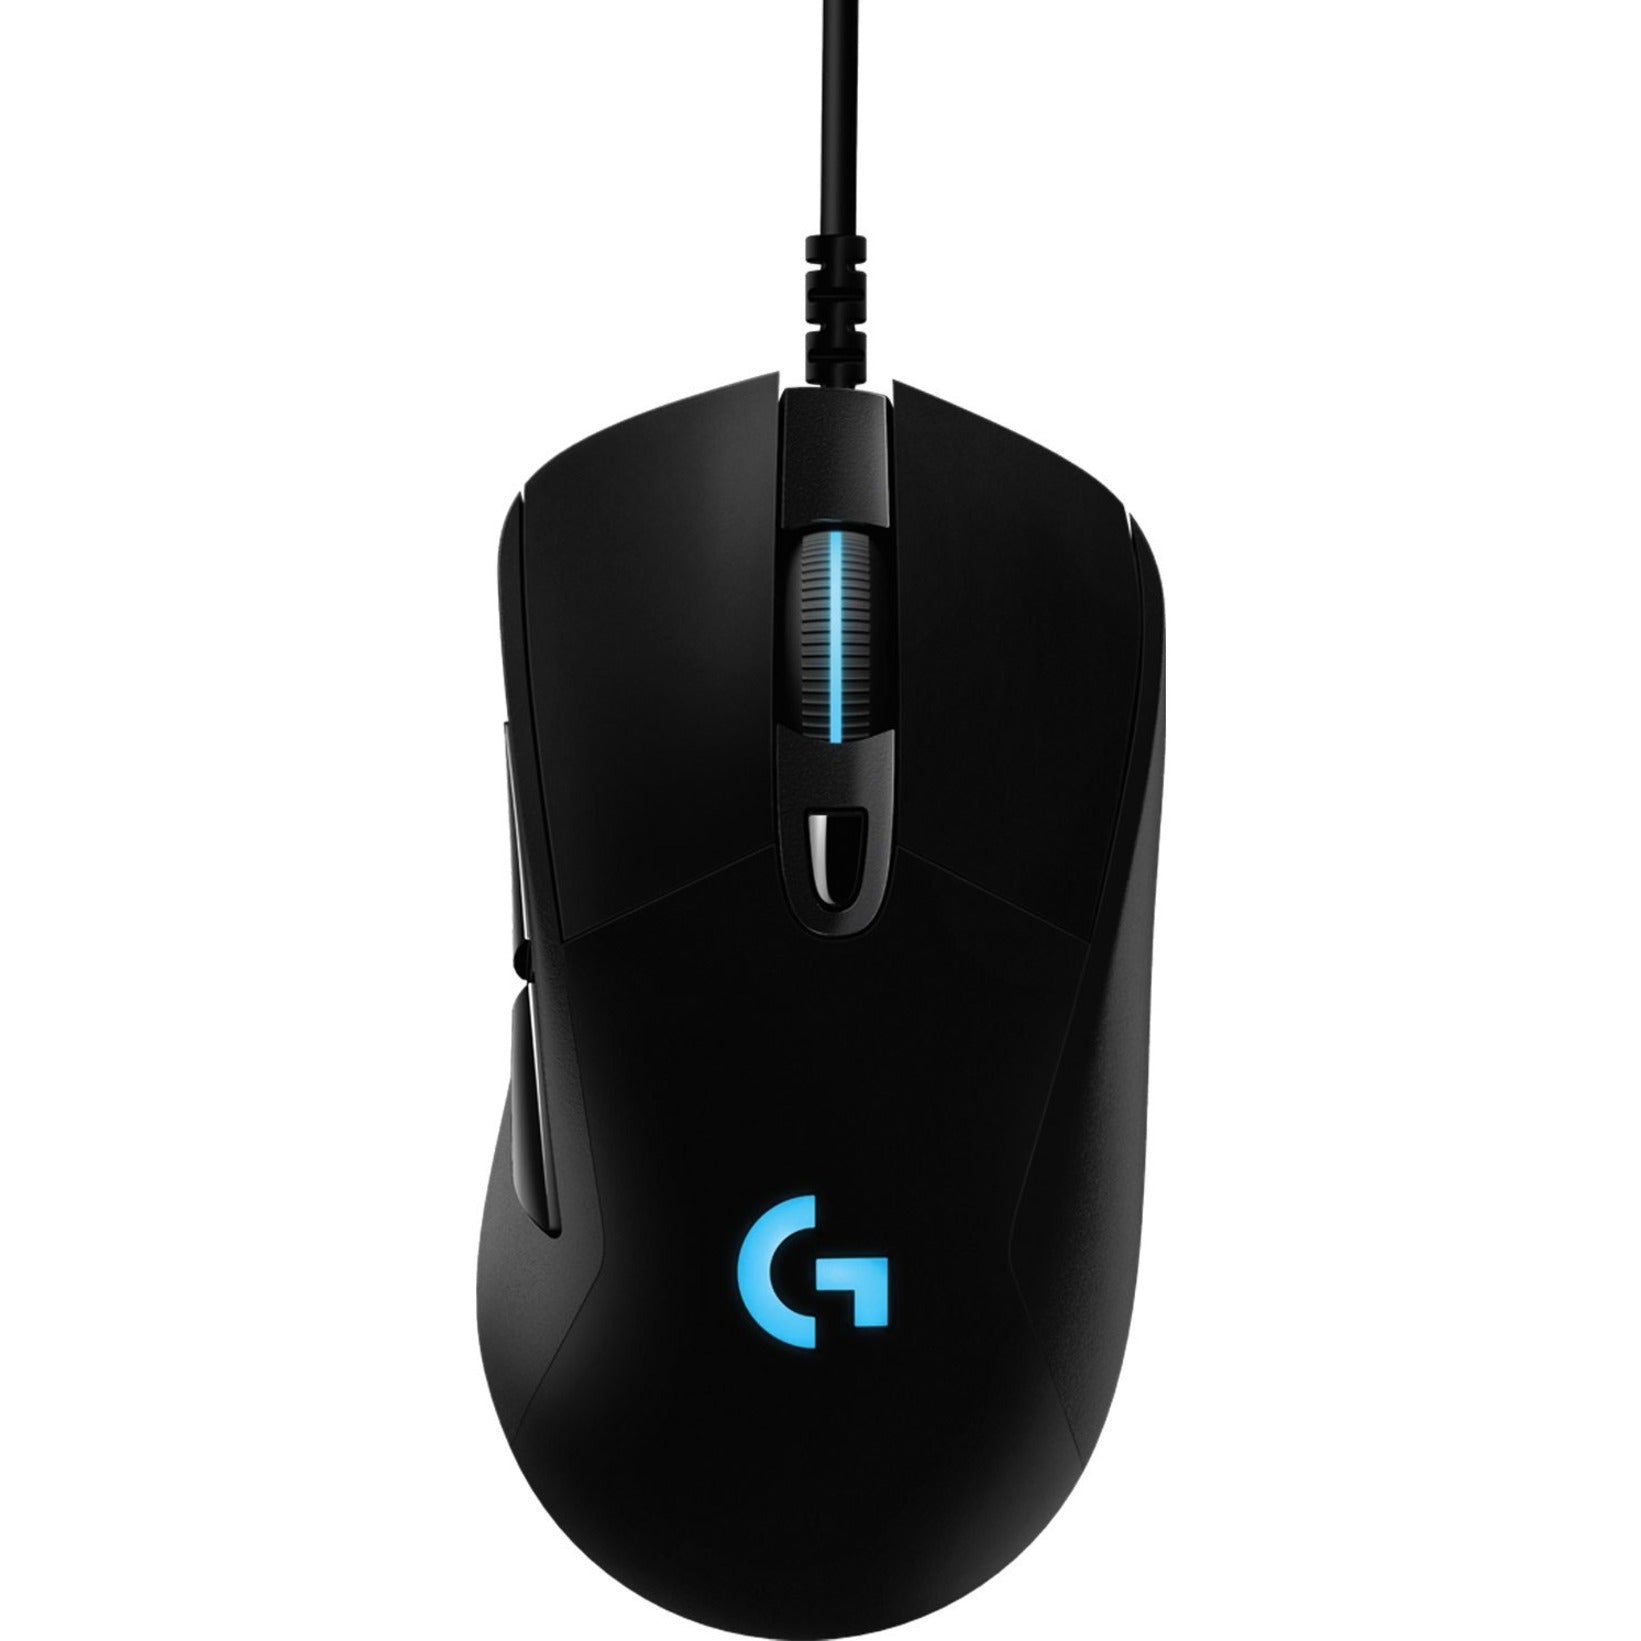 Logitech 910-005630 G403 HERO Gaming Mouse, 6 Buttons, USB Wired, Black